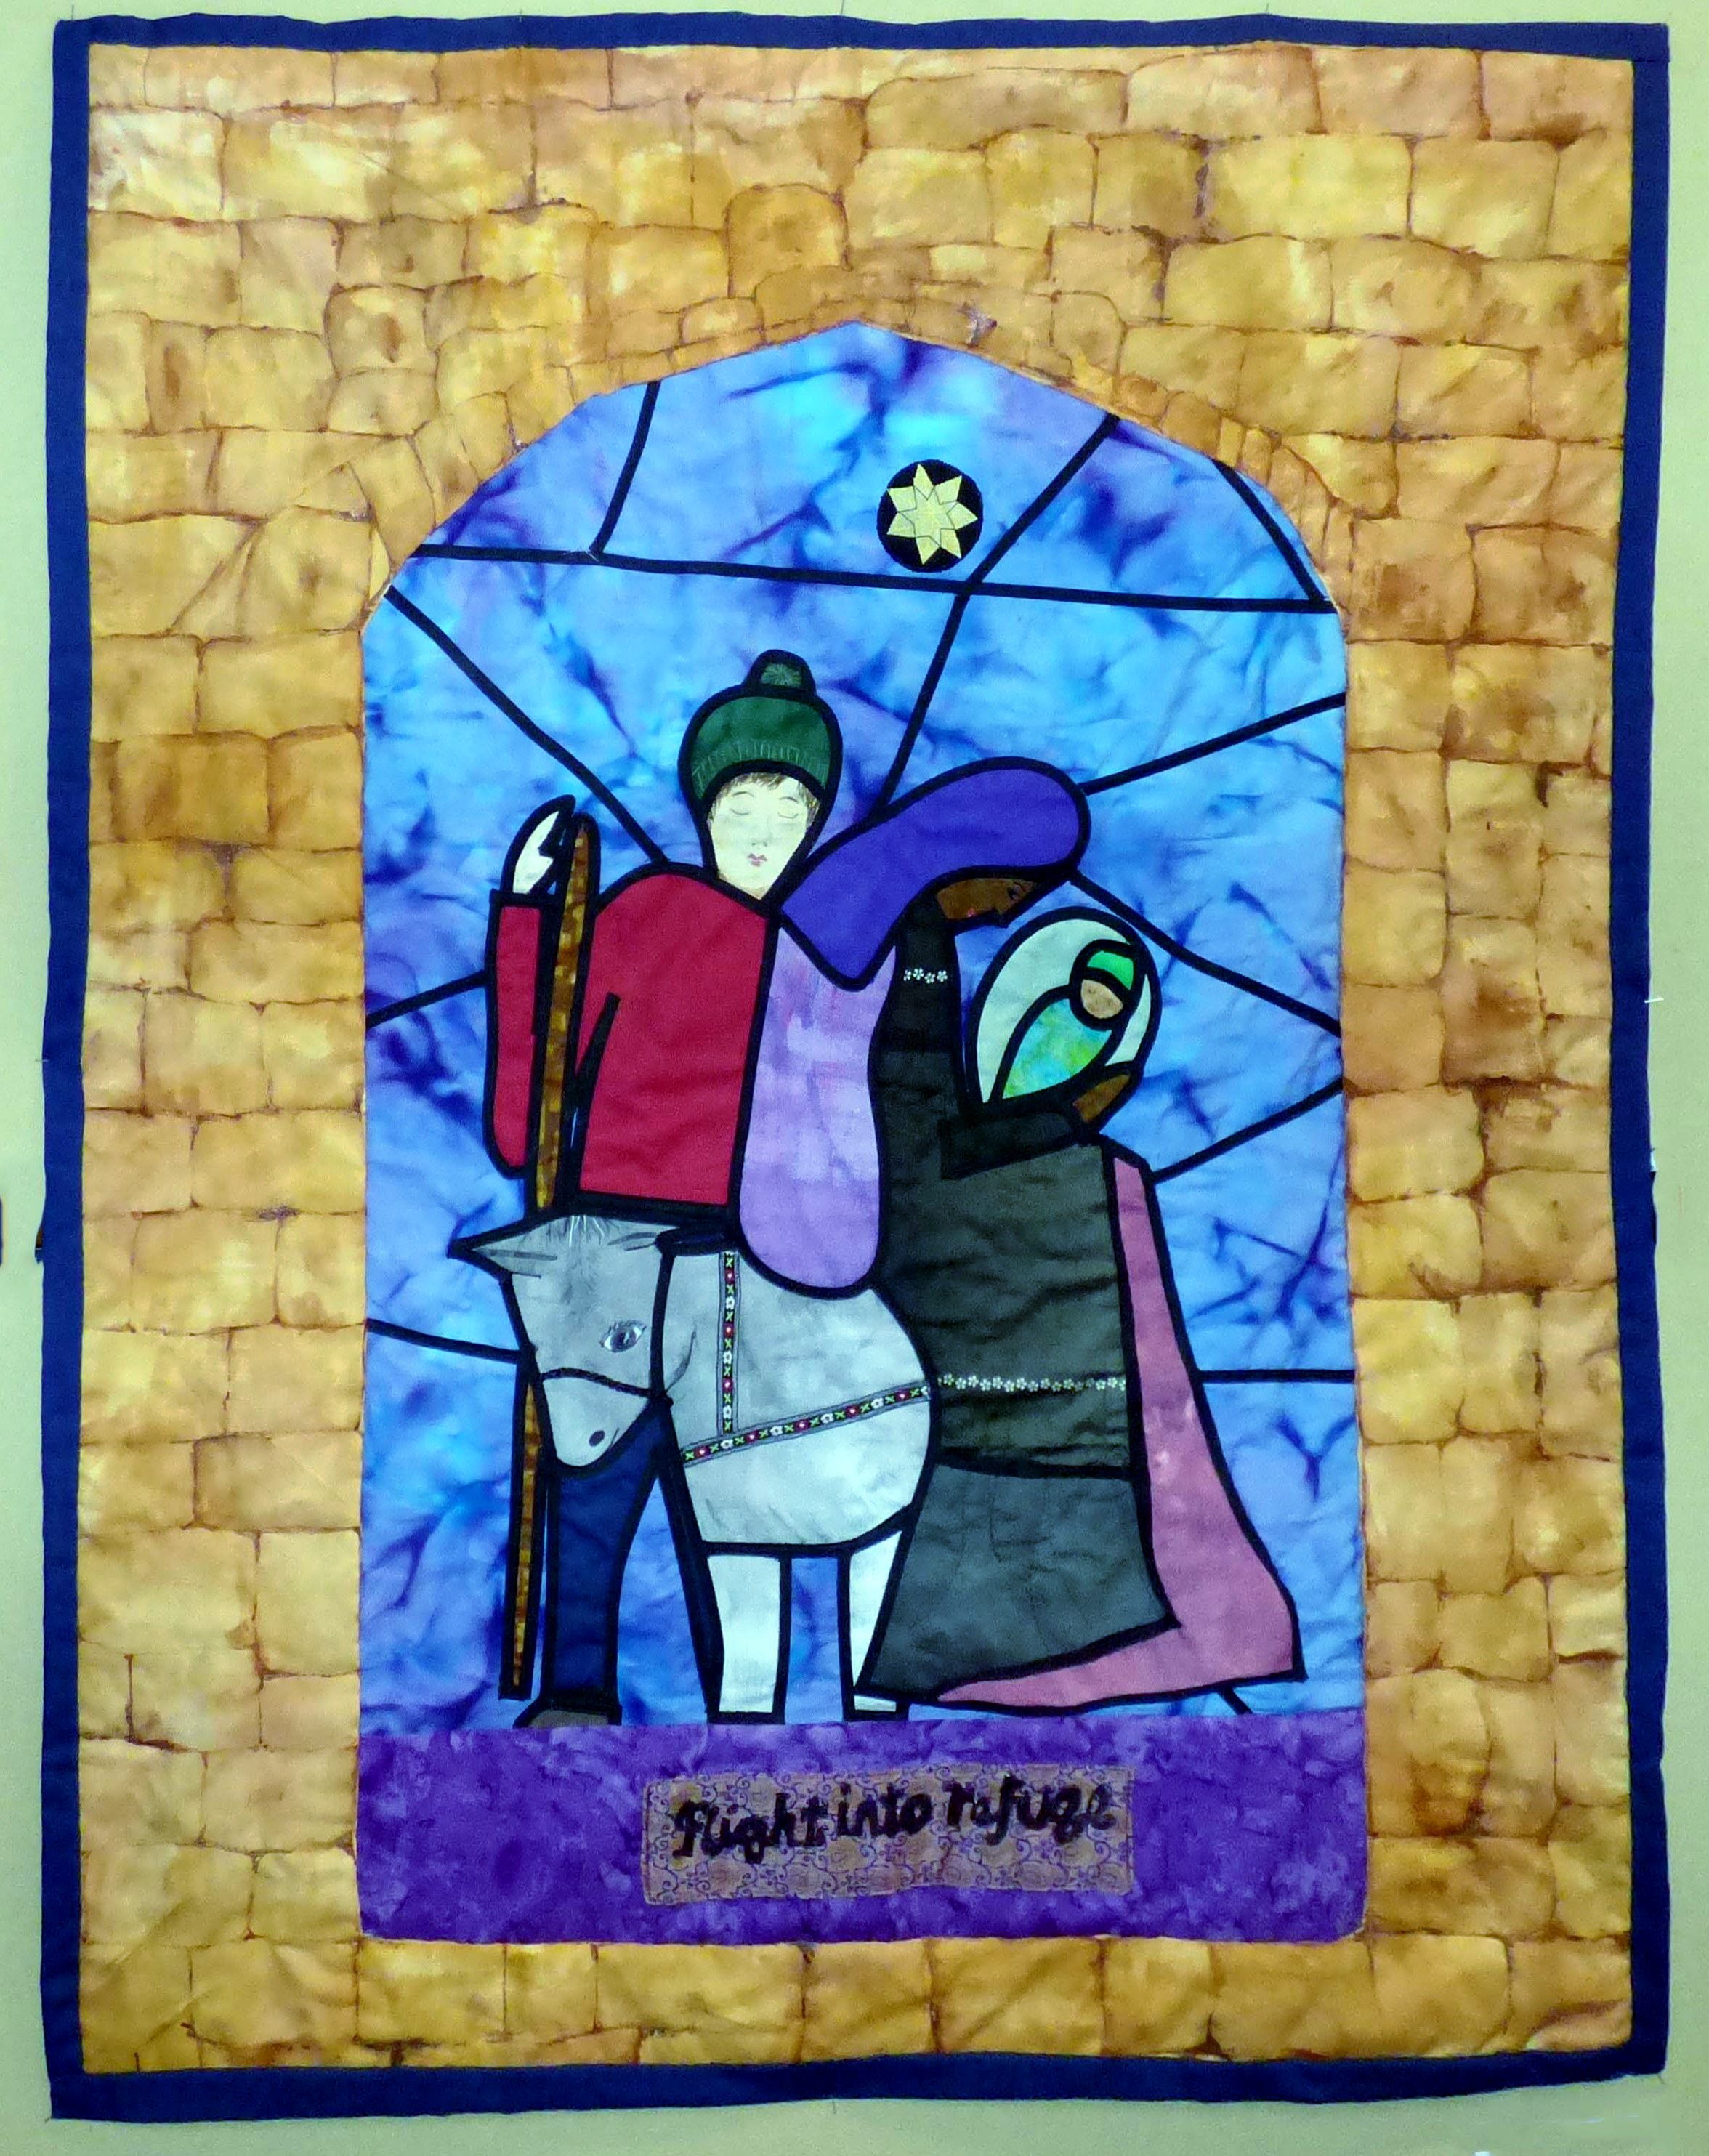 FLIGHT INTO REFUGE by Mal Ralston, quilt hanging, Exhibition at All Hallows Church, September 2022